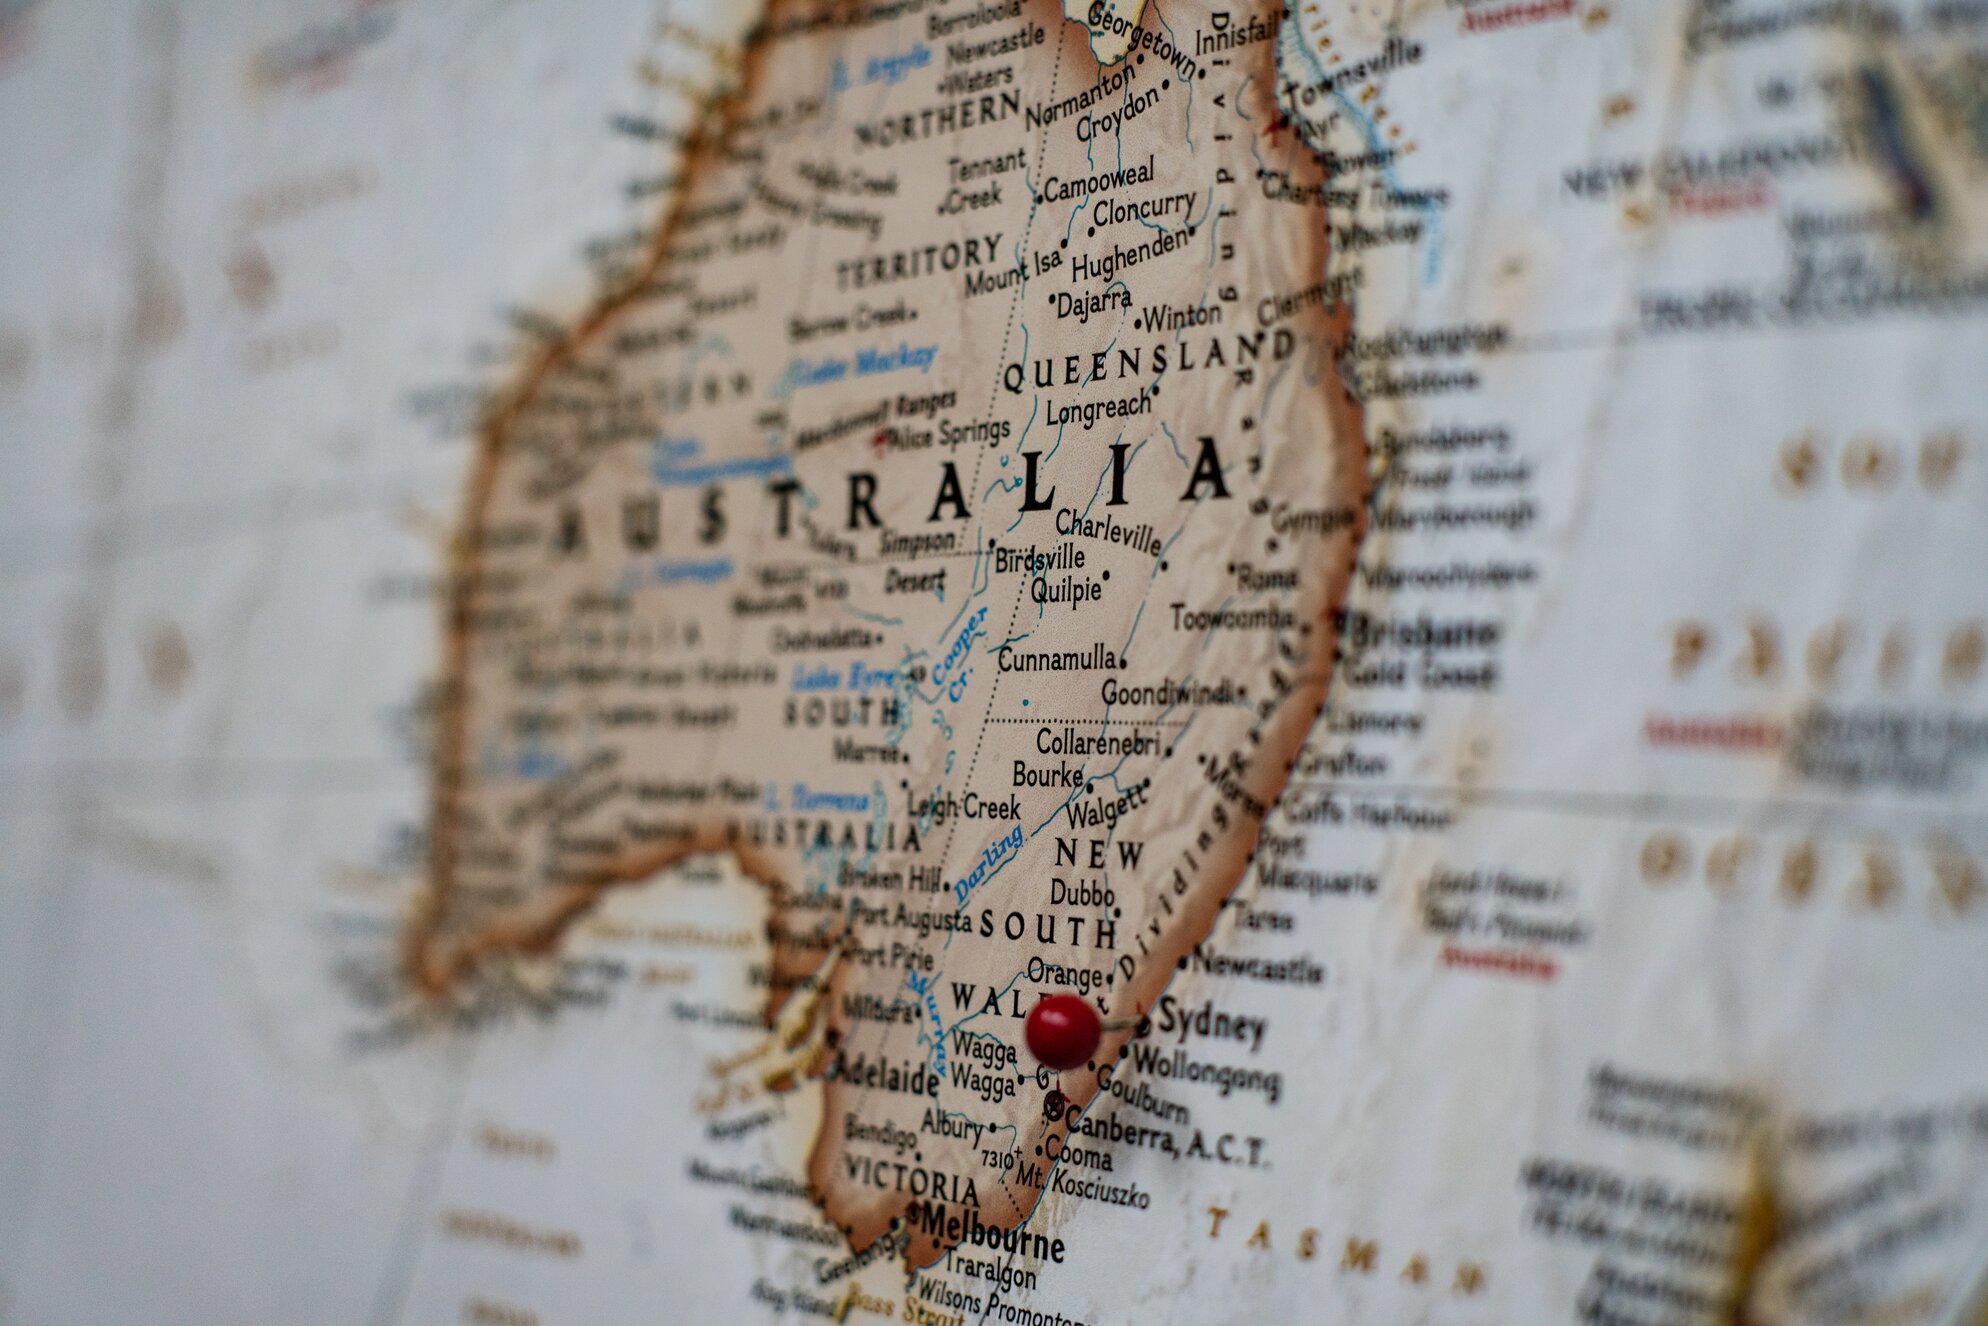 Current Developments in food law and policy in Australia and elsewhere (March 2018)